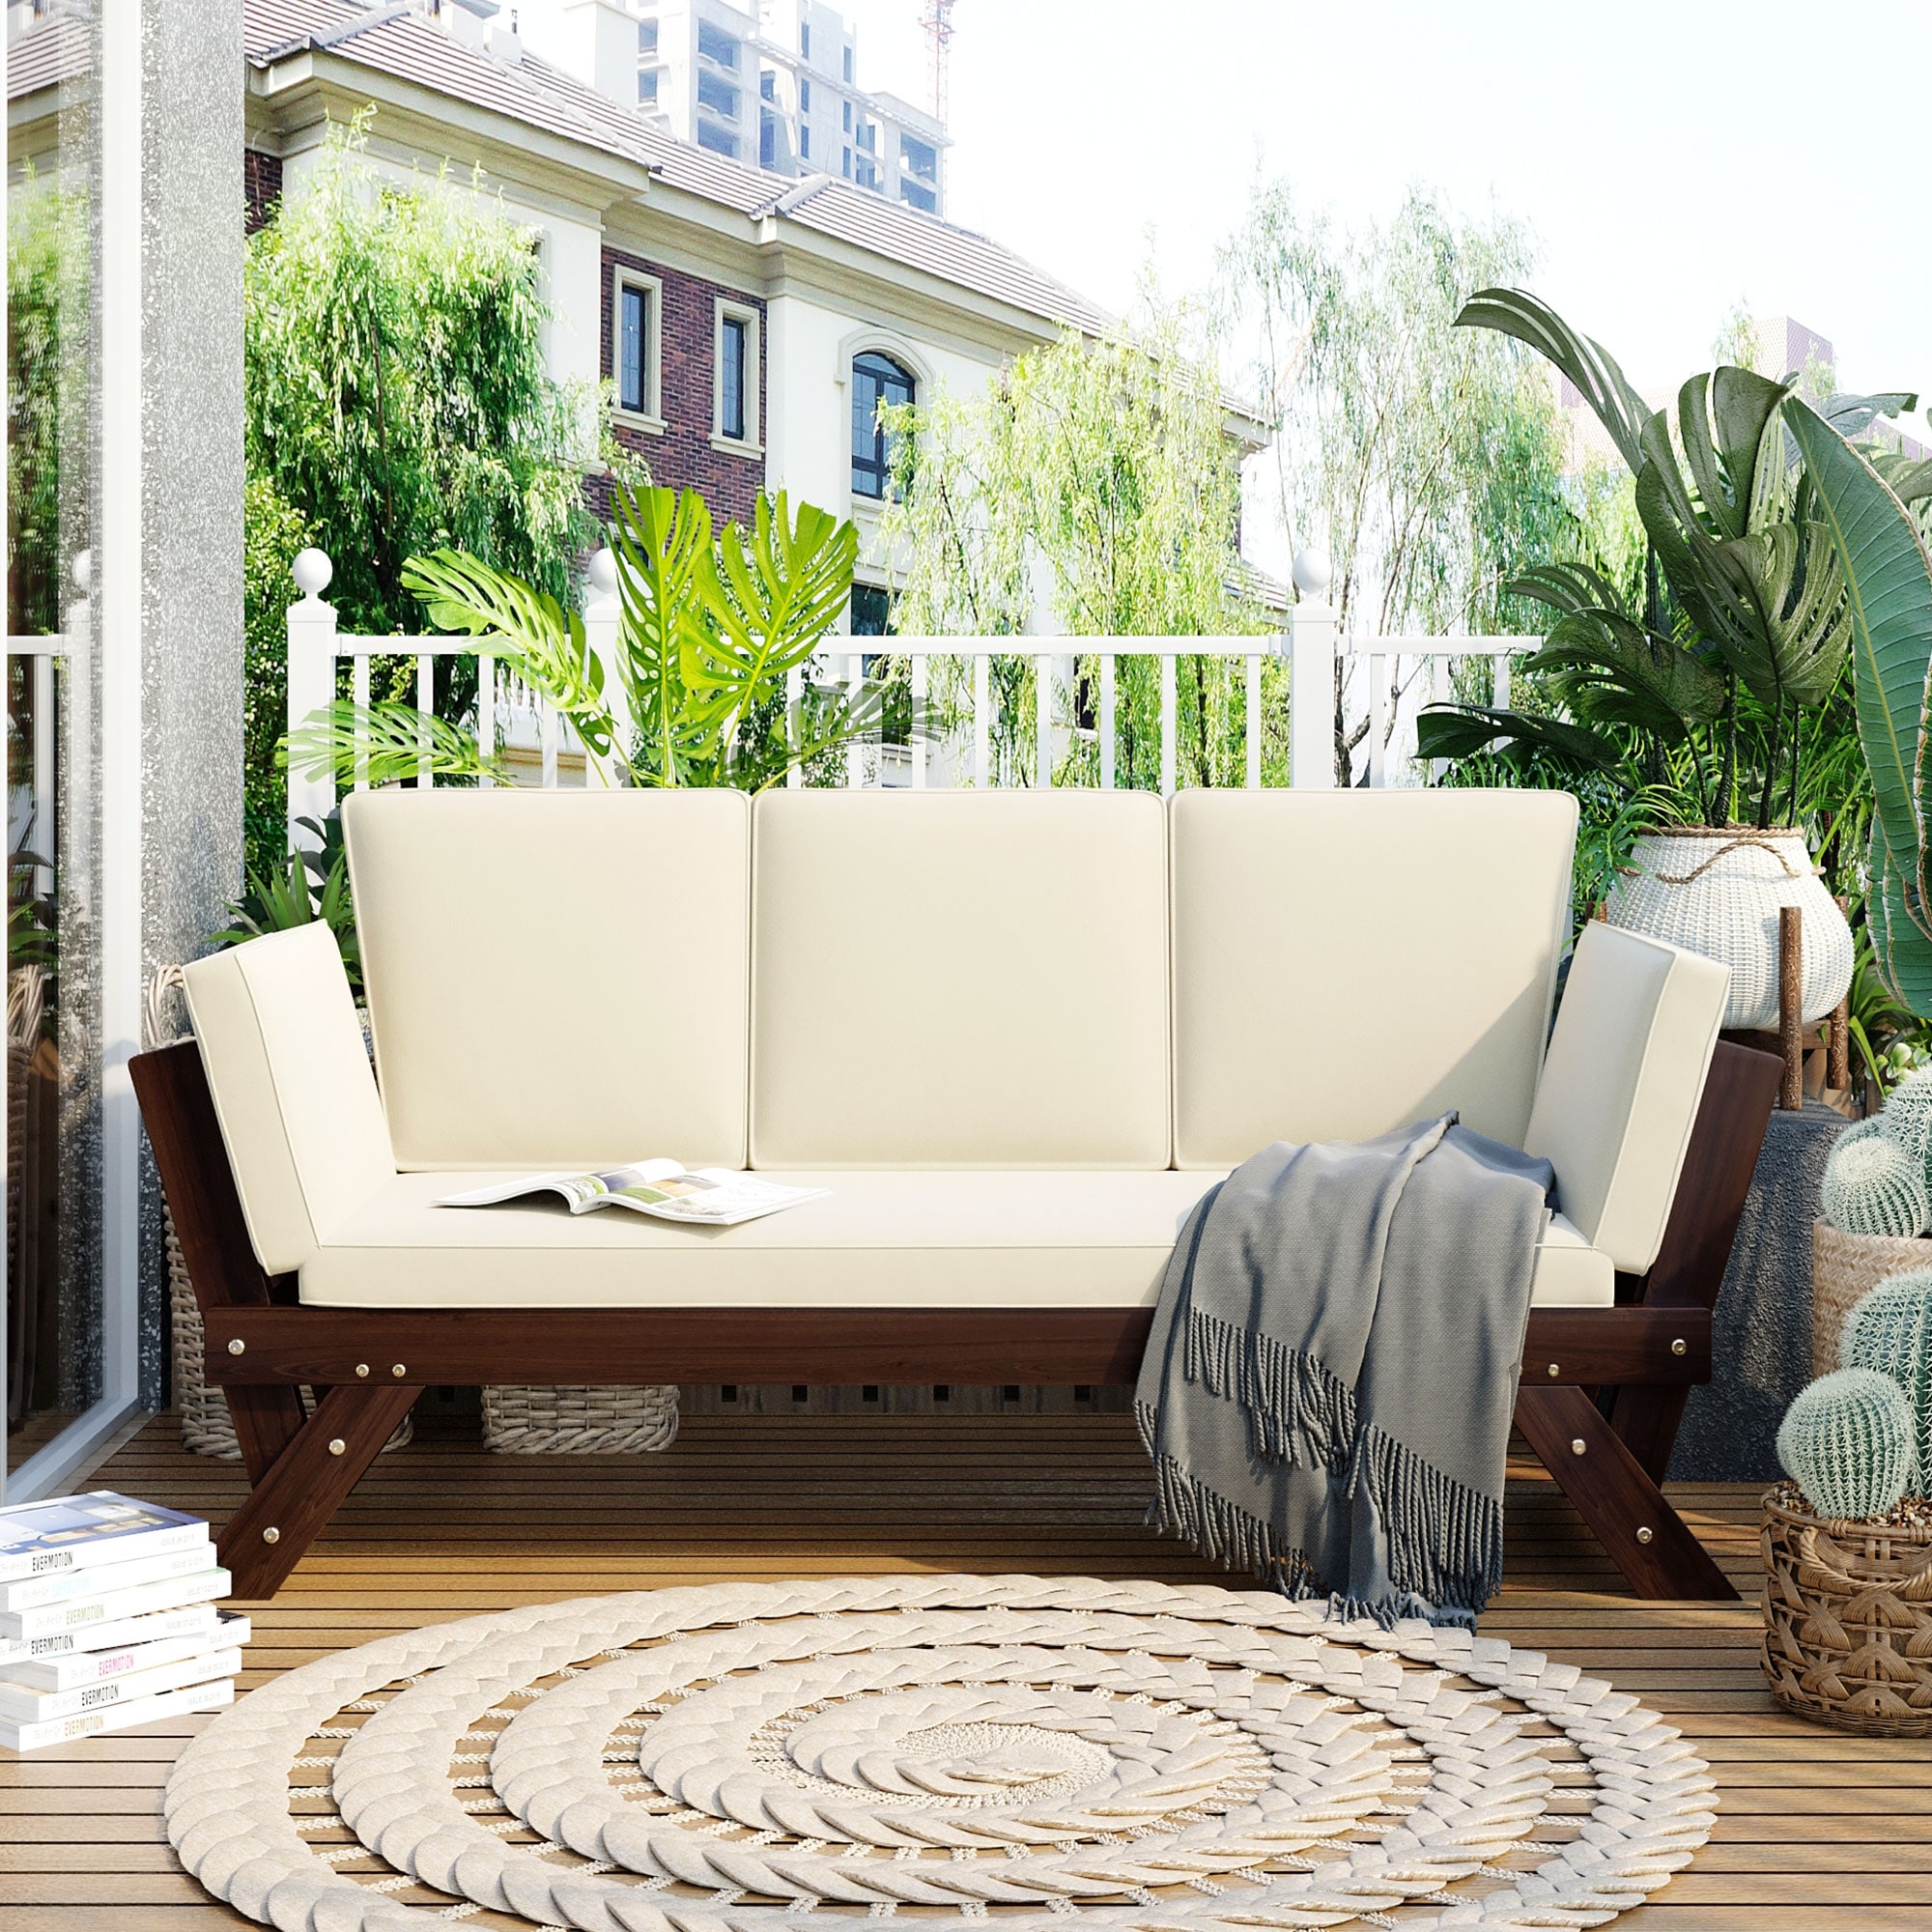 3-seater Sofa Outdoor Patio Expandable Daybed  Adjustable Wooden Chaise Lounge